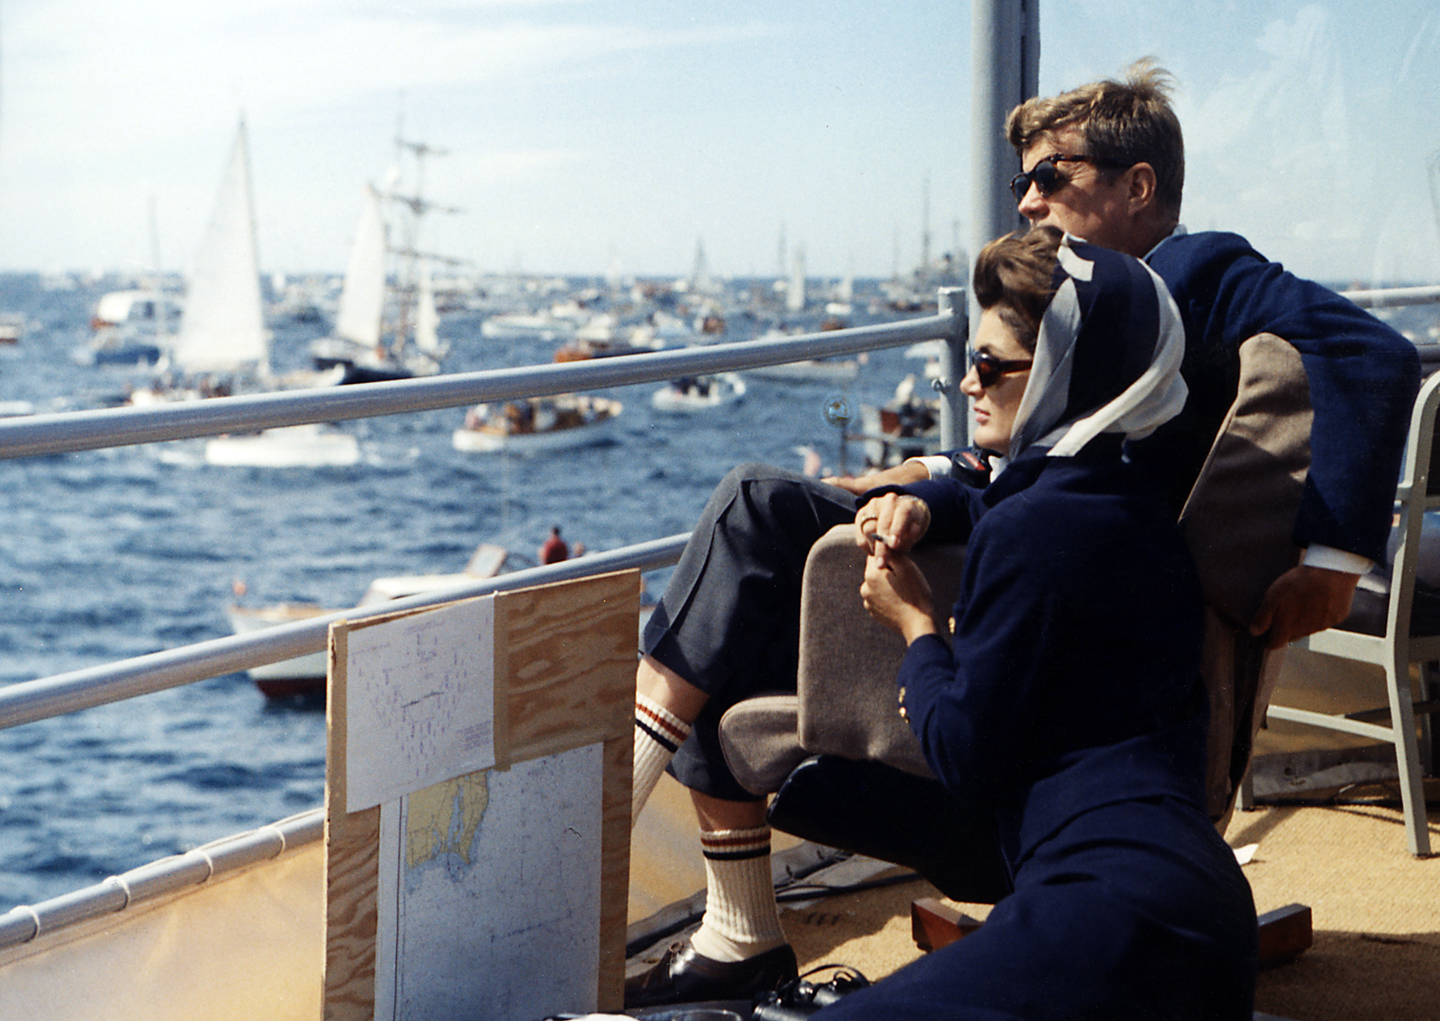  John. F. Kennedy and Jacqueline Kennedy watch the 1962 America's Cup races off Newport. Photo: Robert Knudsen / Wikimedia 